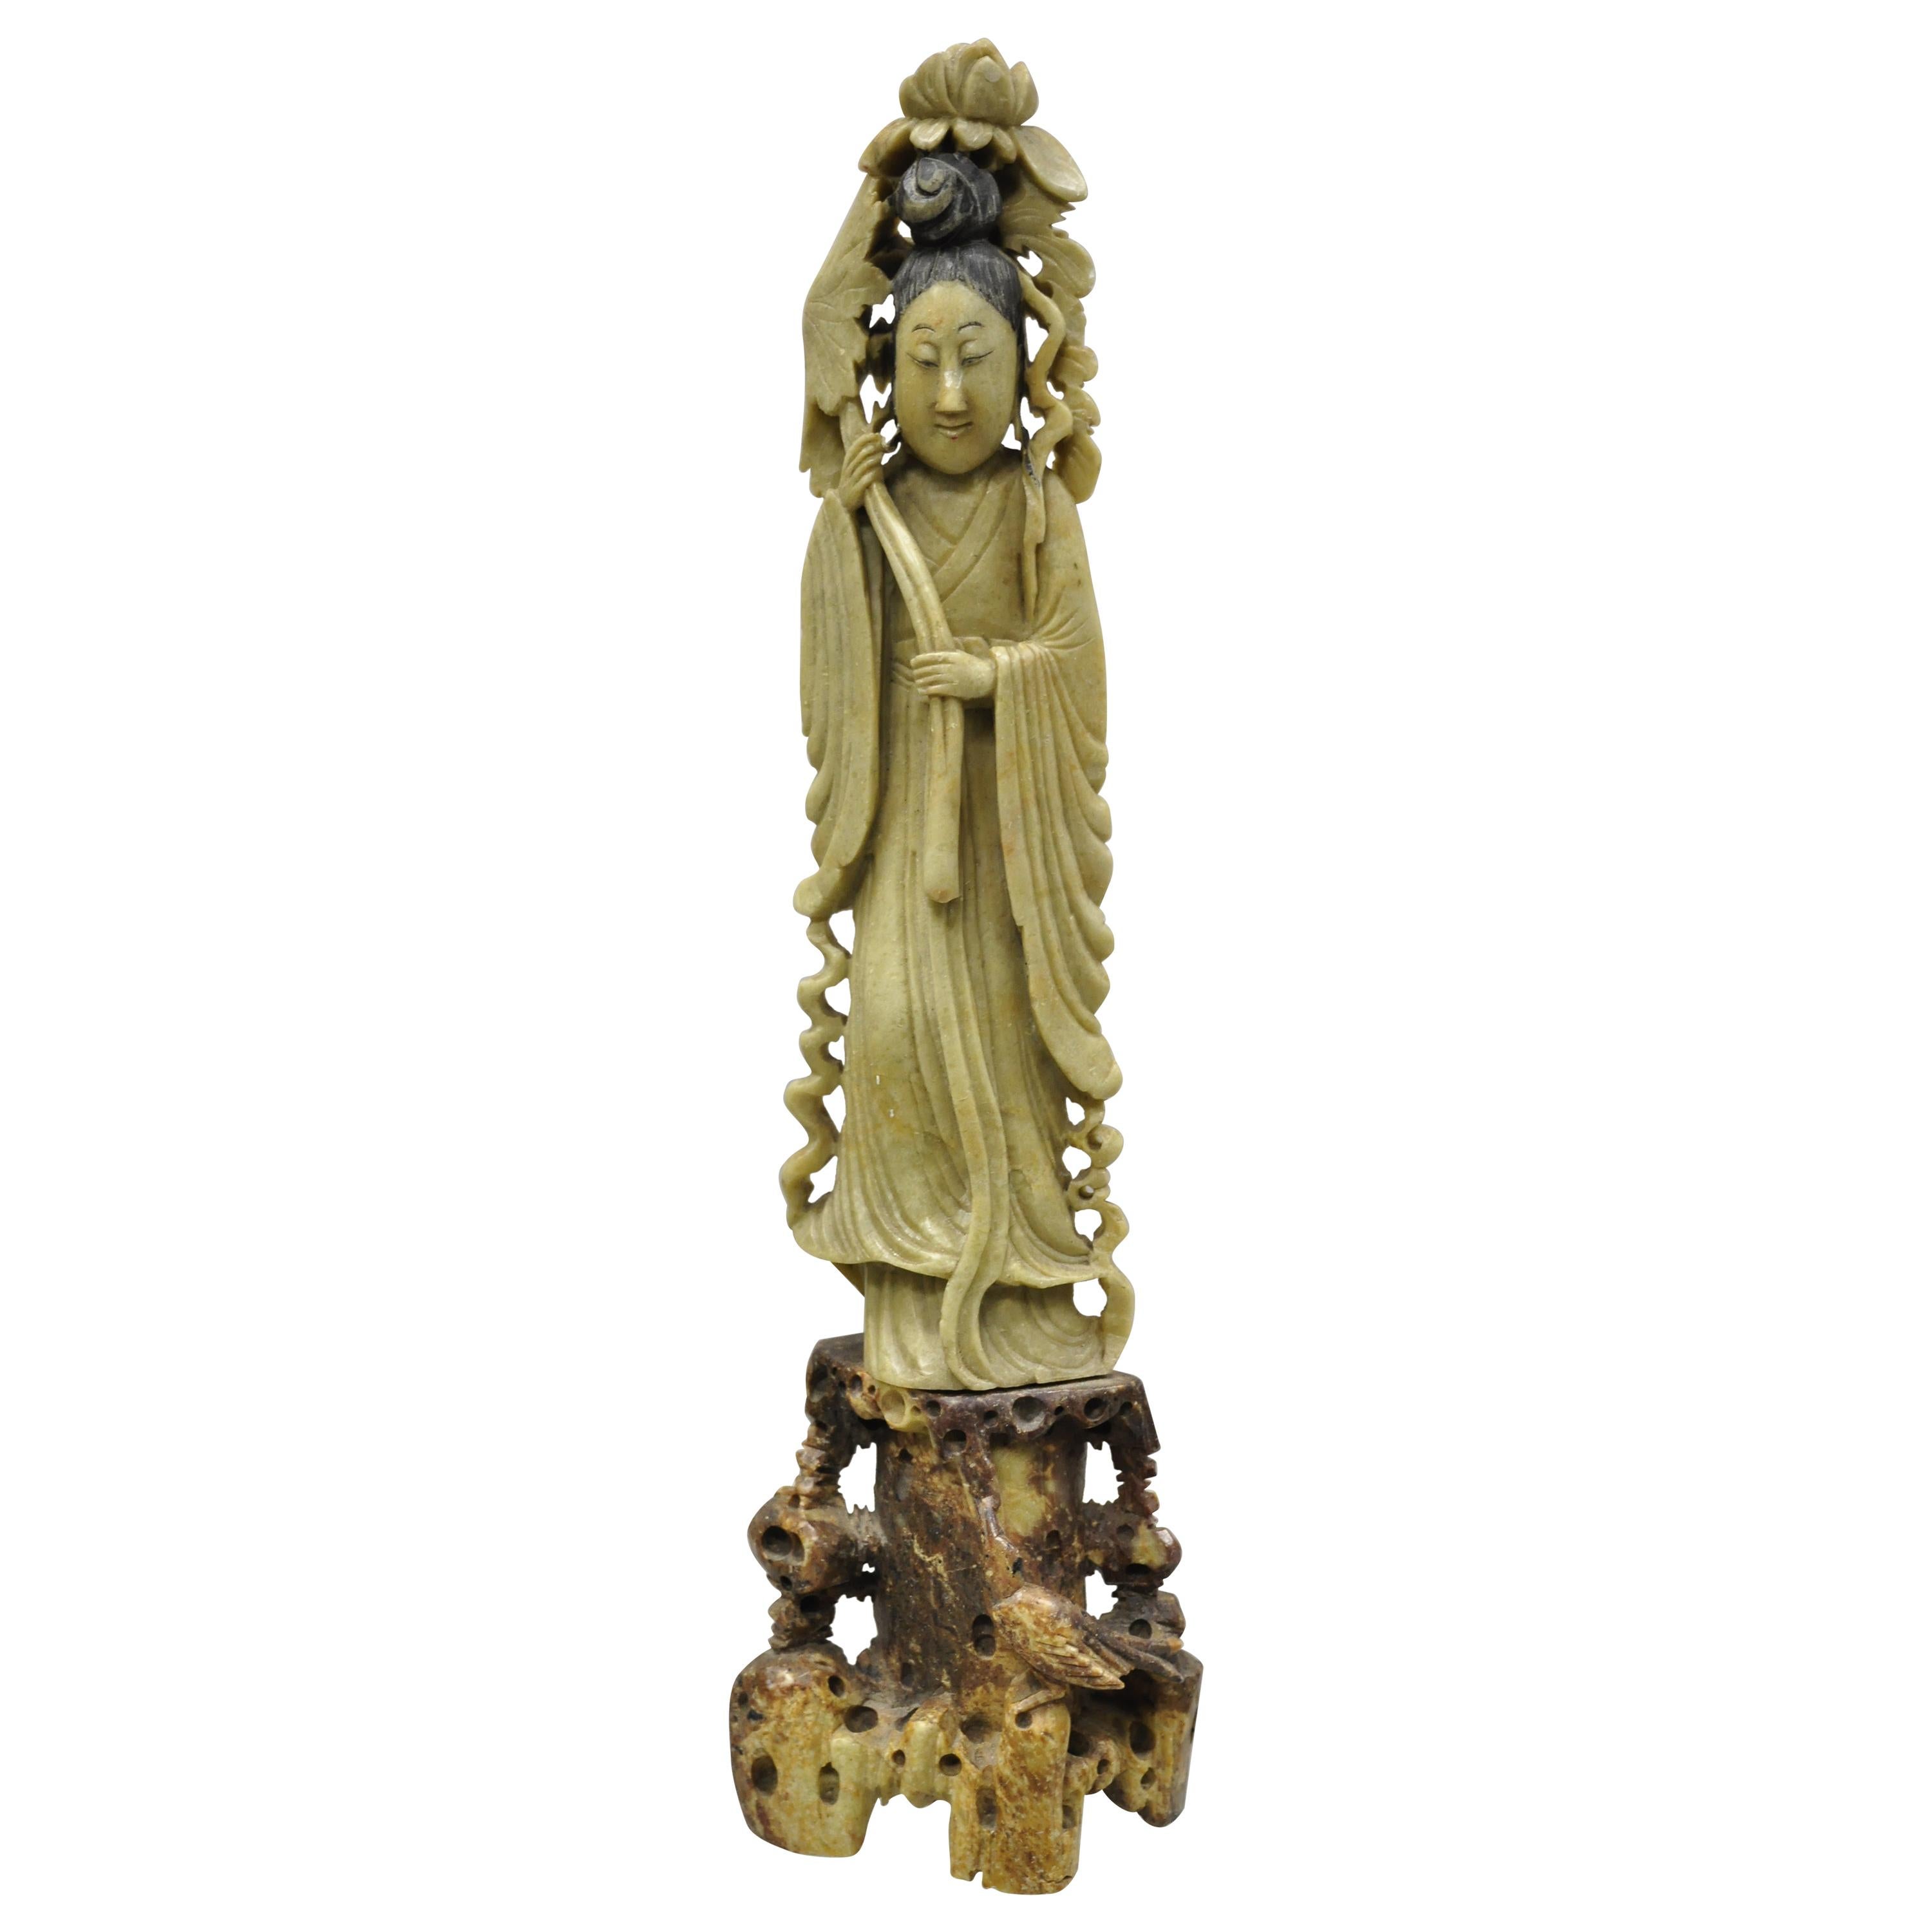 What does Kuan Yin hold?